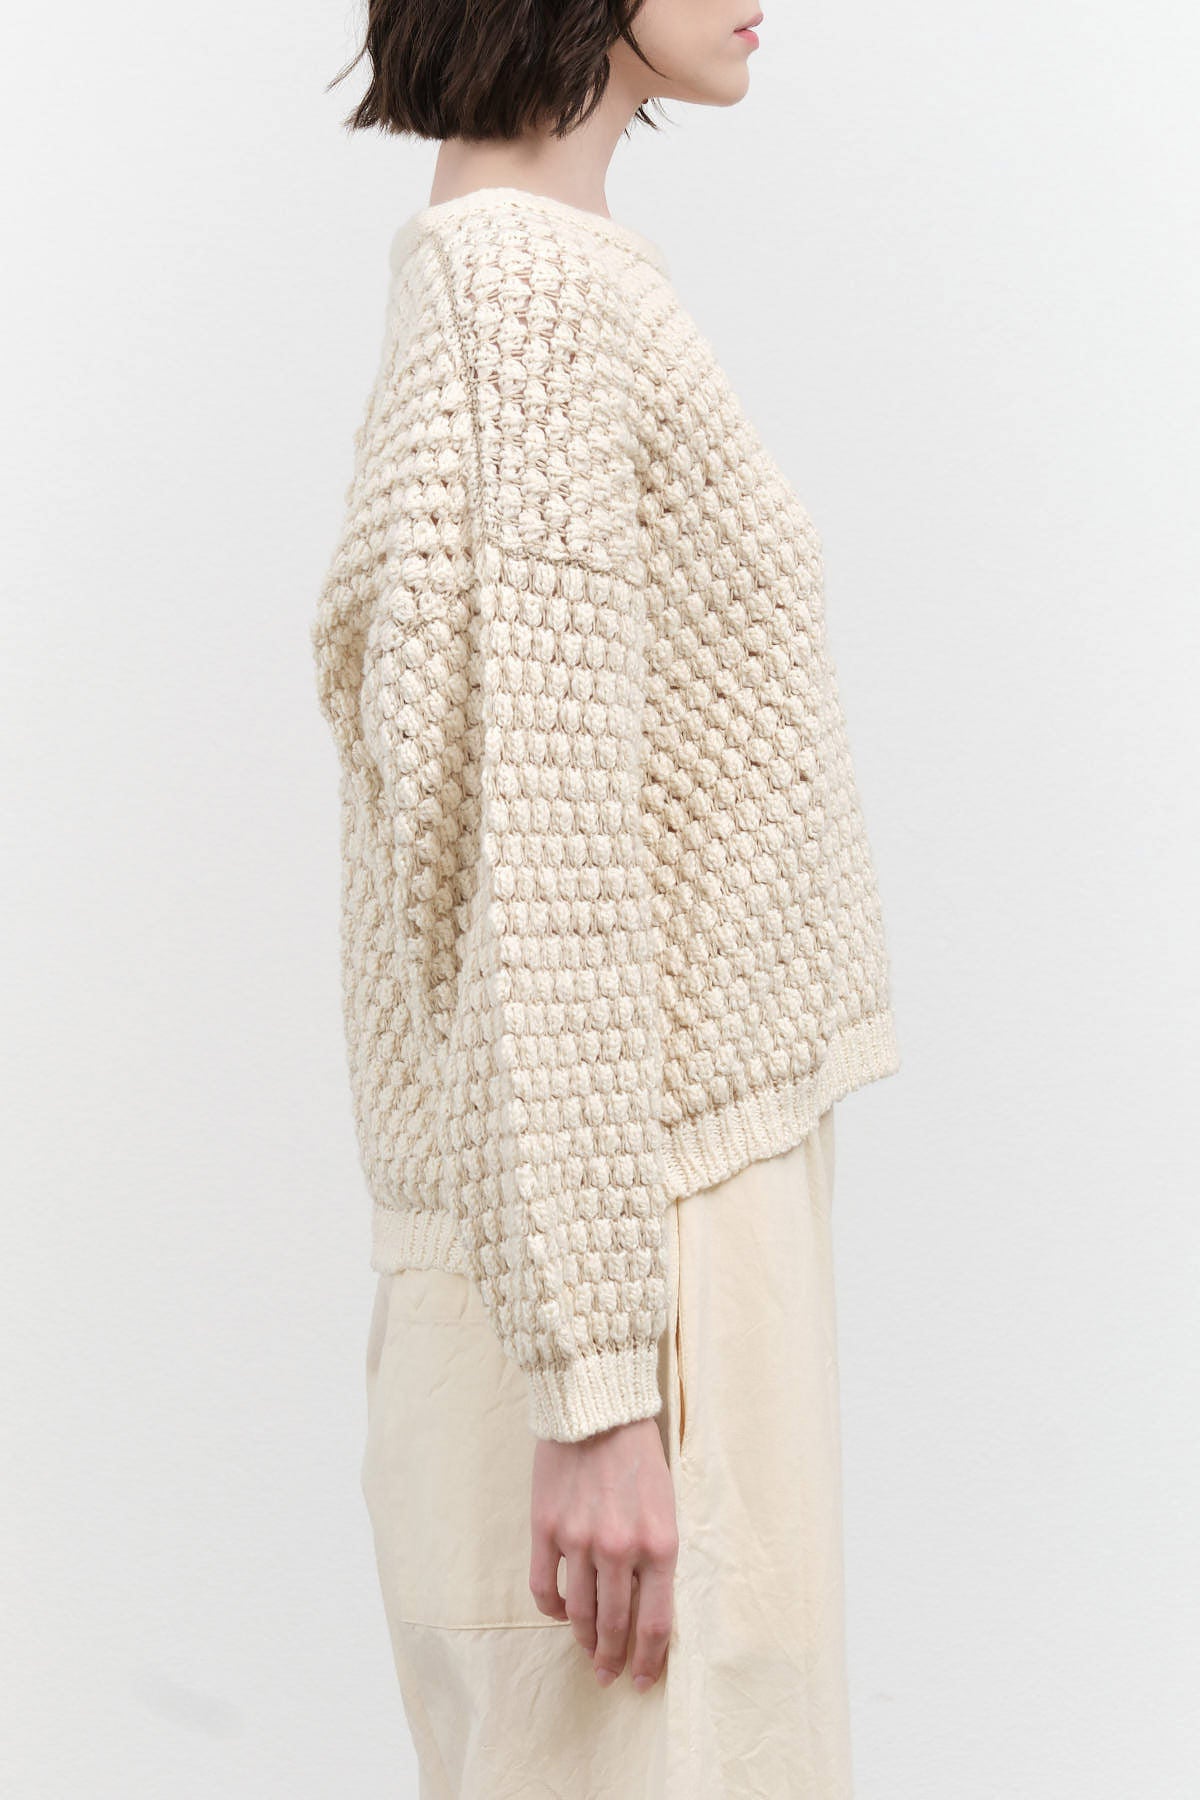 Bone Off White Long Sleeve Textured Pullover Sweater by Wol Hide